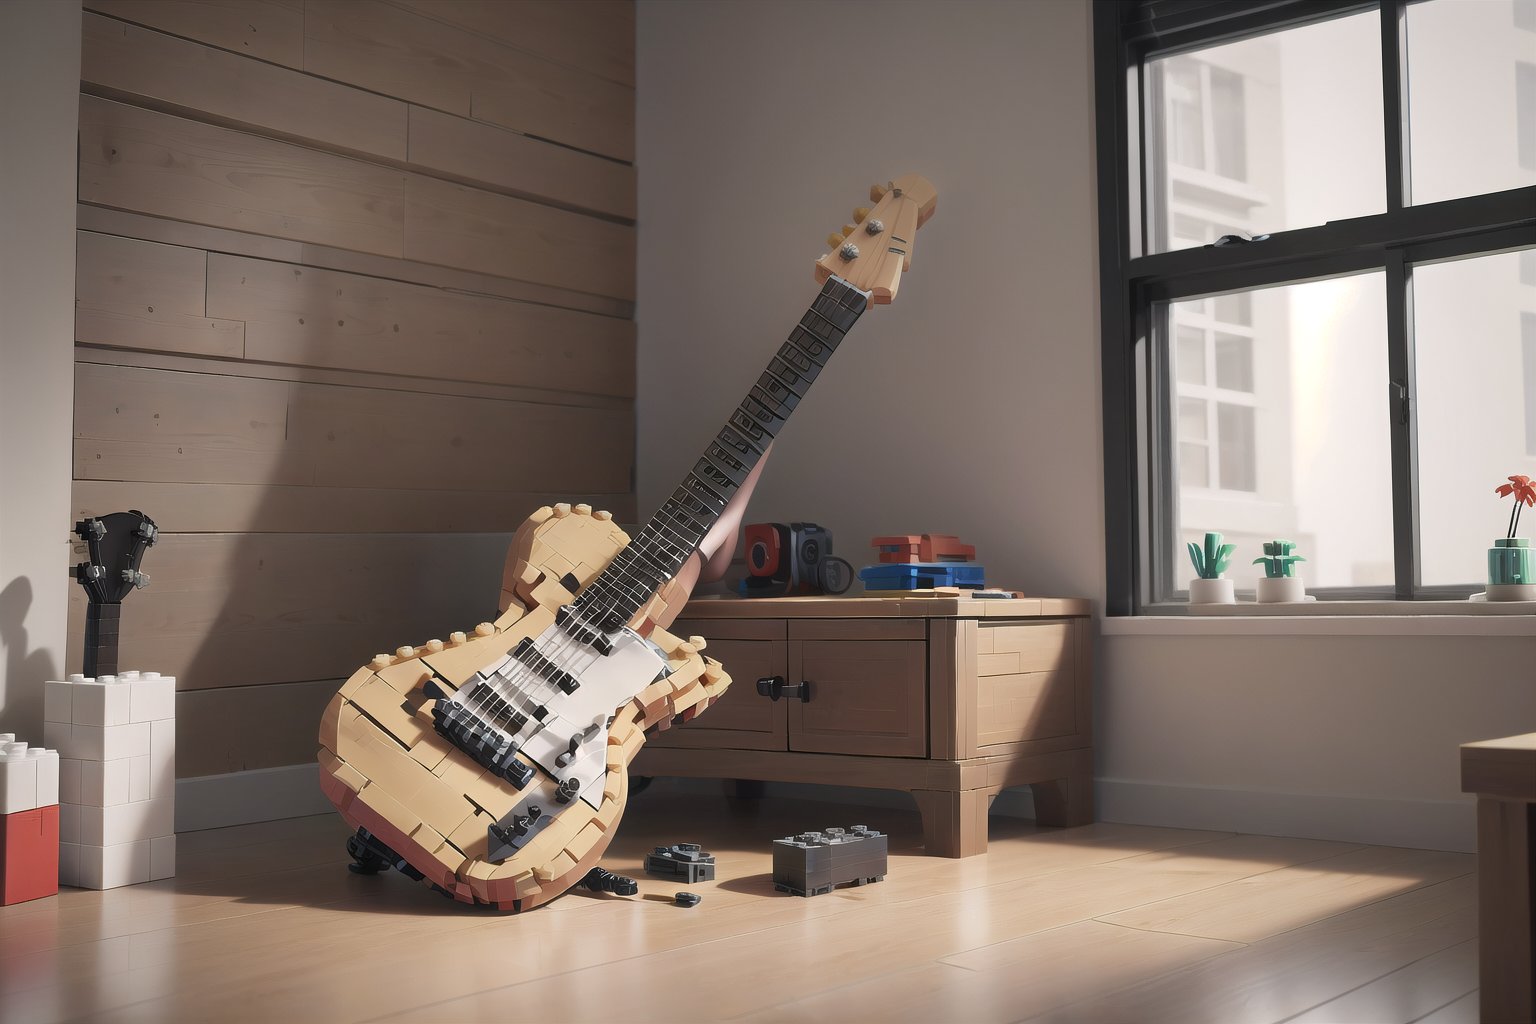 indoor, a wooden table, a lego guitar